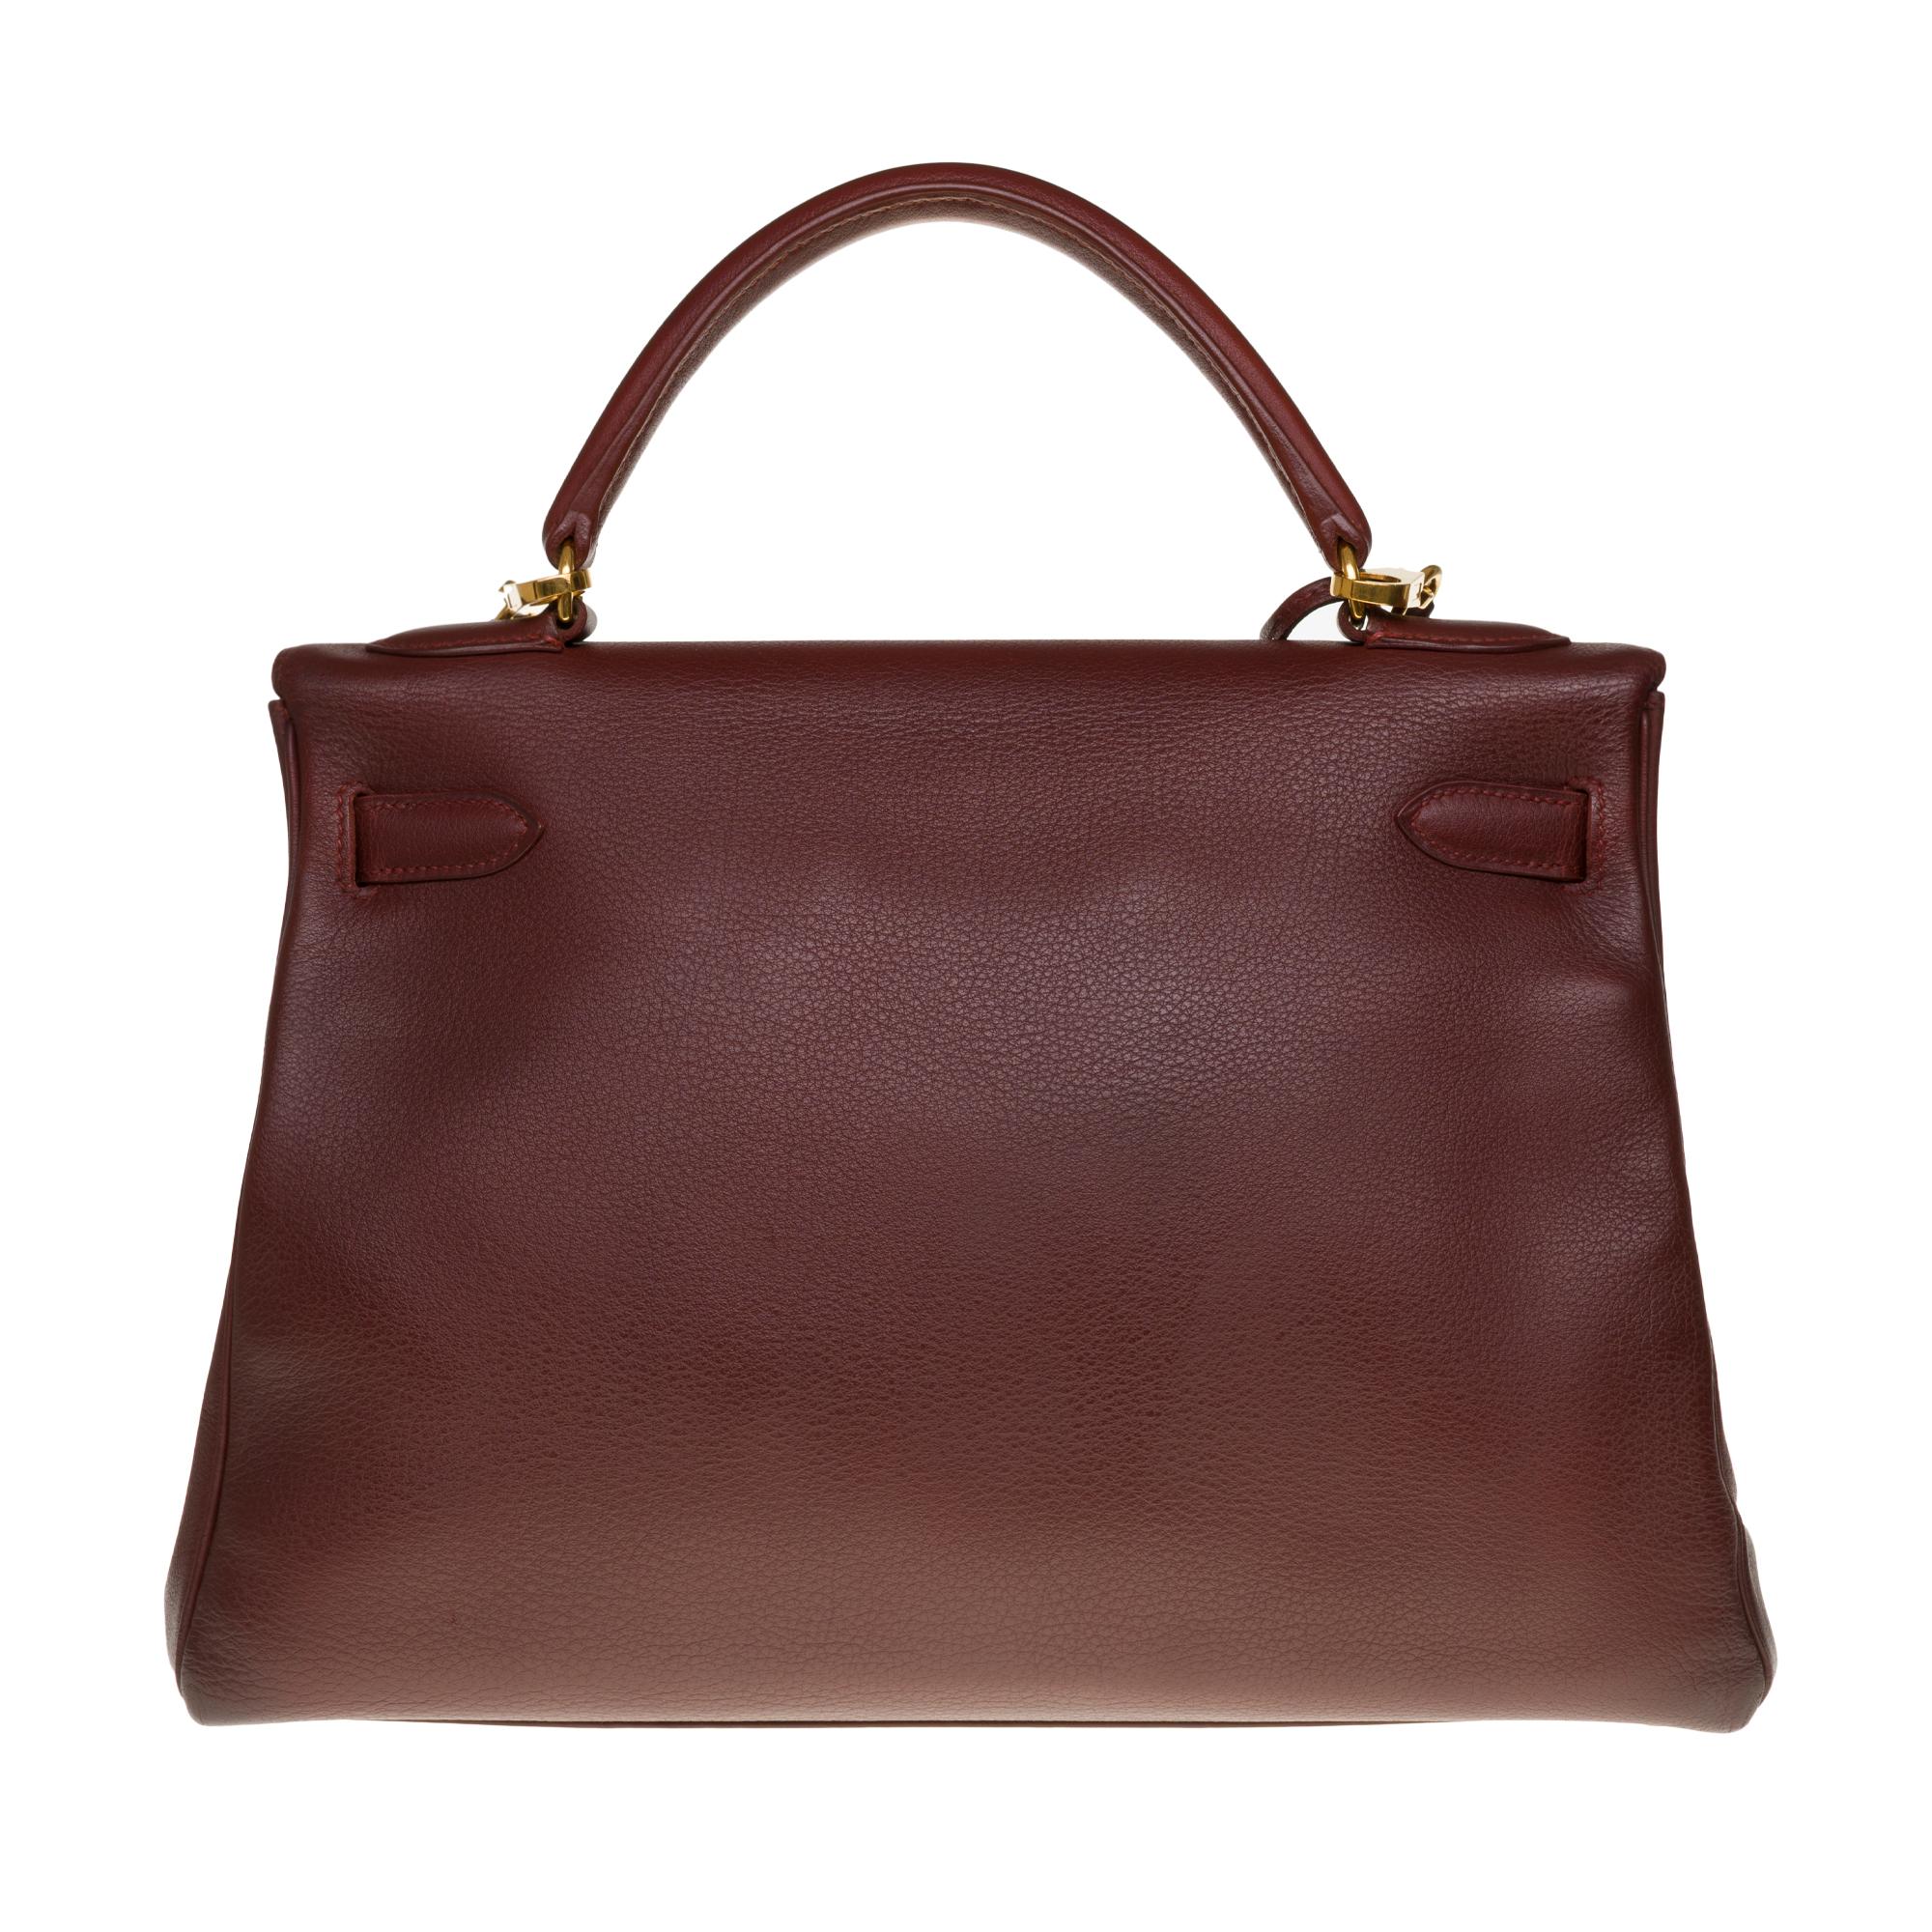 Splendid & Rare Hermes Kelly 32 retourné Shoulder Bag in Brown Mysore Goat (The Mysore Goat is known for its robustness and lightness), gold-plated metal hardware, brown leather handle, Removable shoulder strap handle in brown leather allowing a